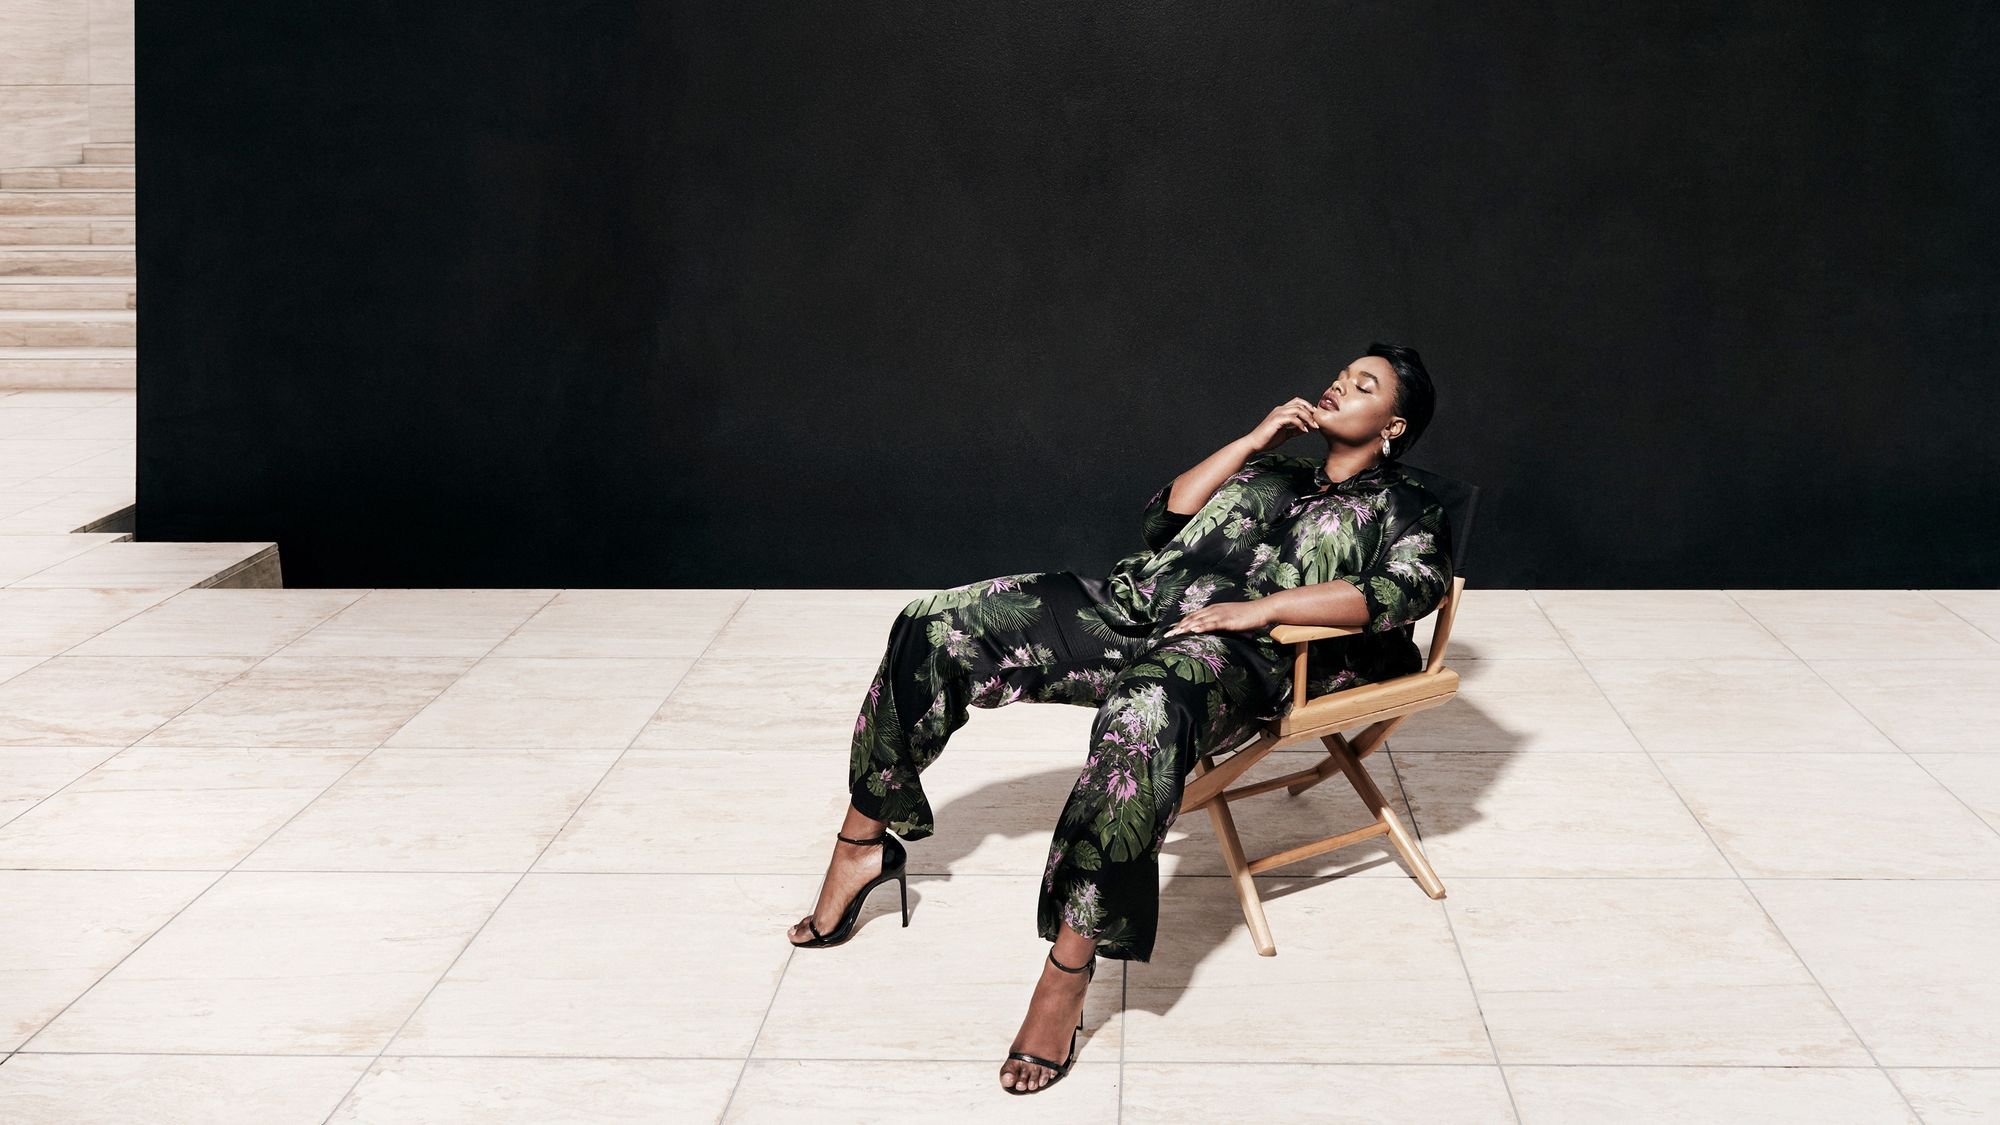 Model Precious Lee for 11 Honoré – wearing matching floral silk shirt and pants. Art Direction by RoAndCo   